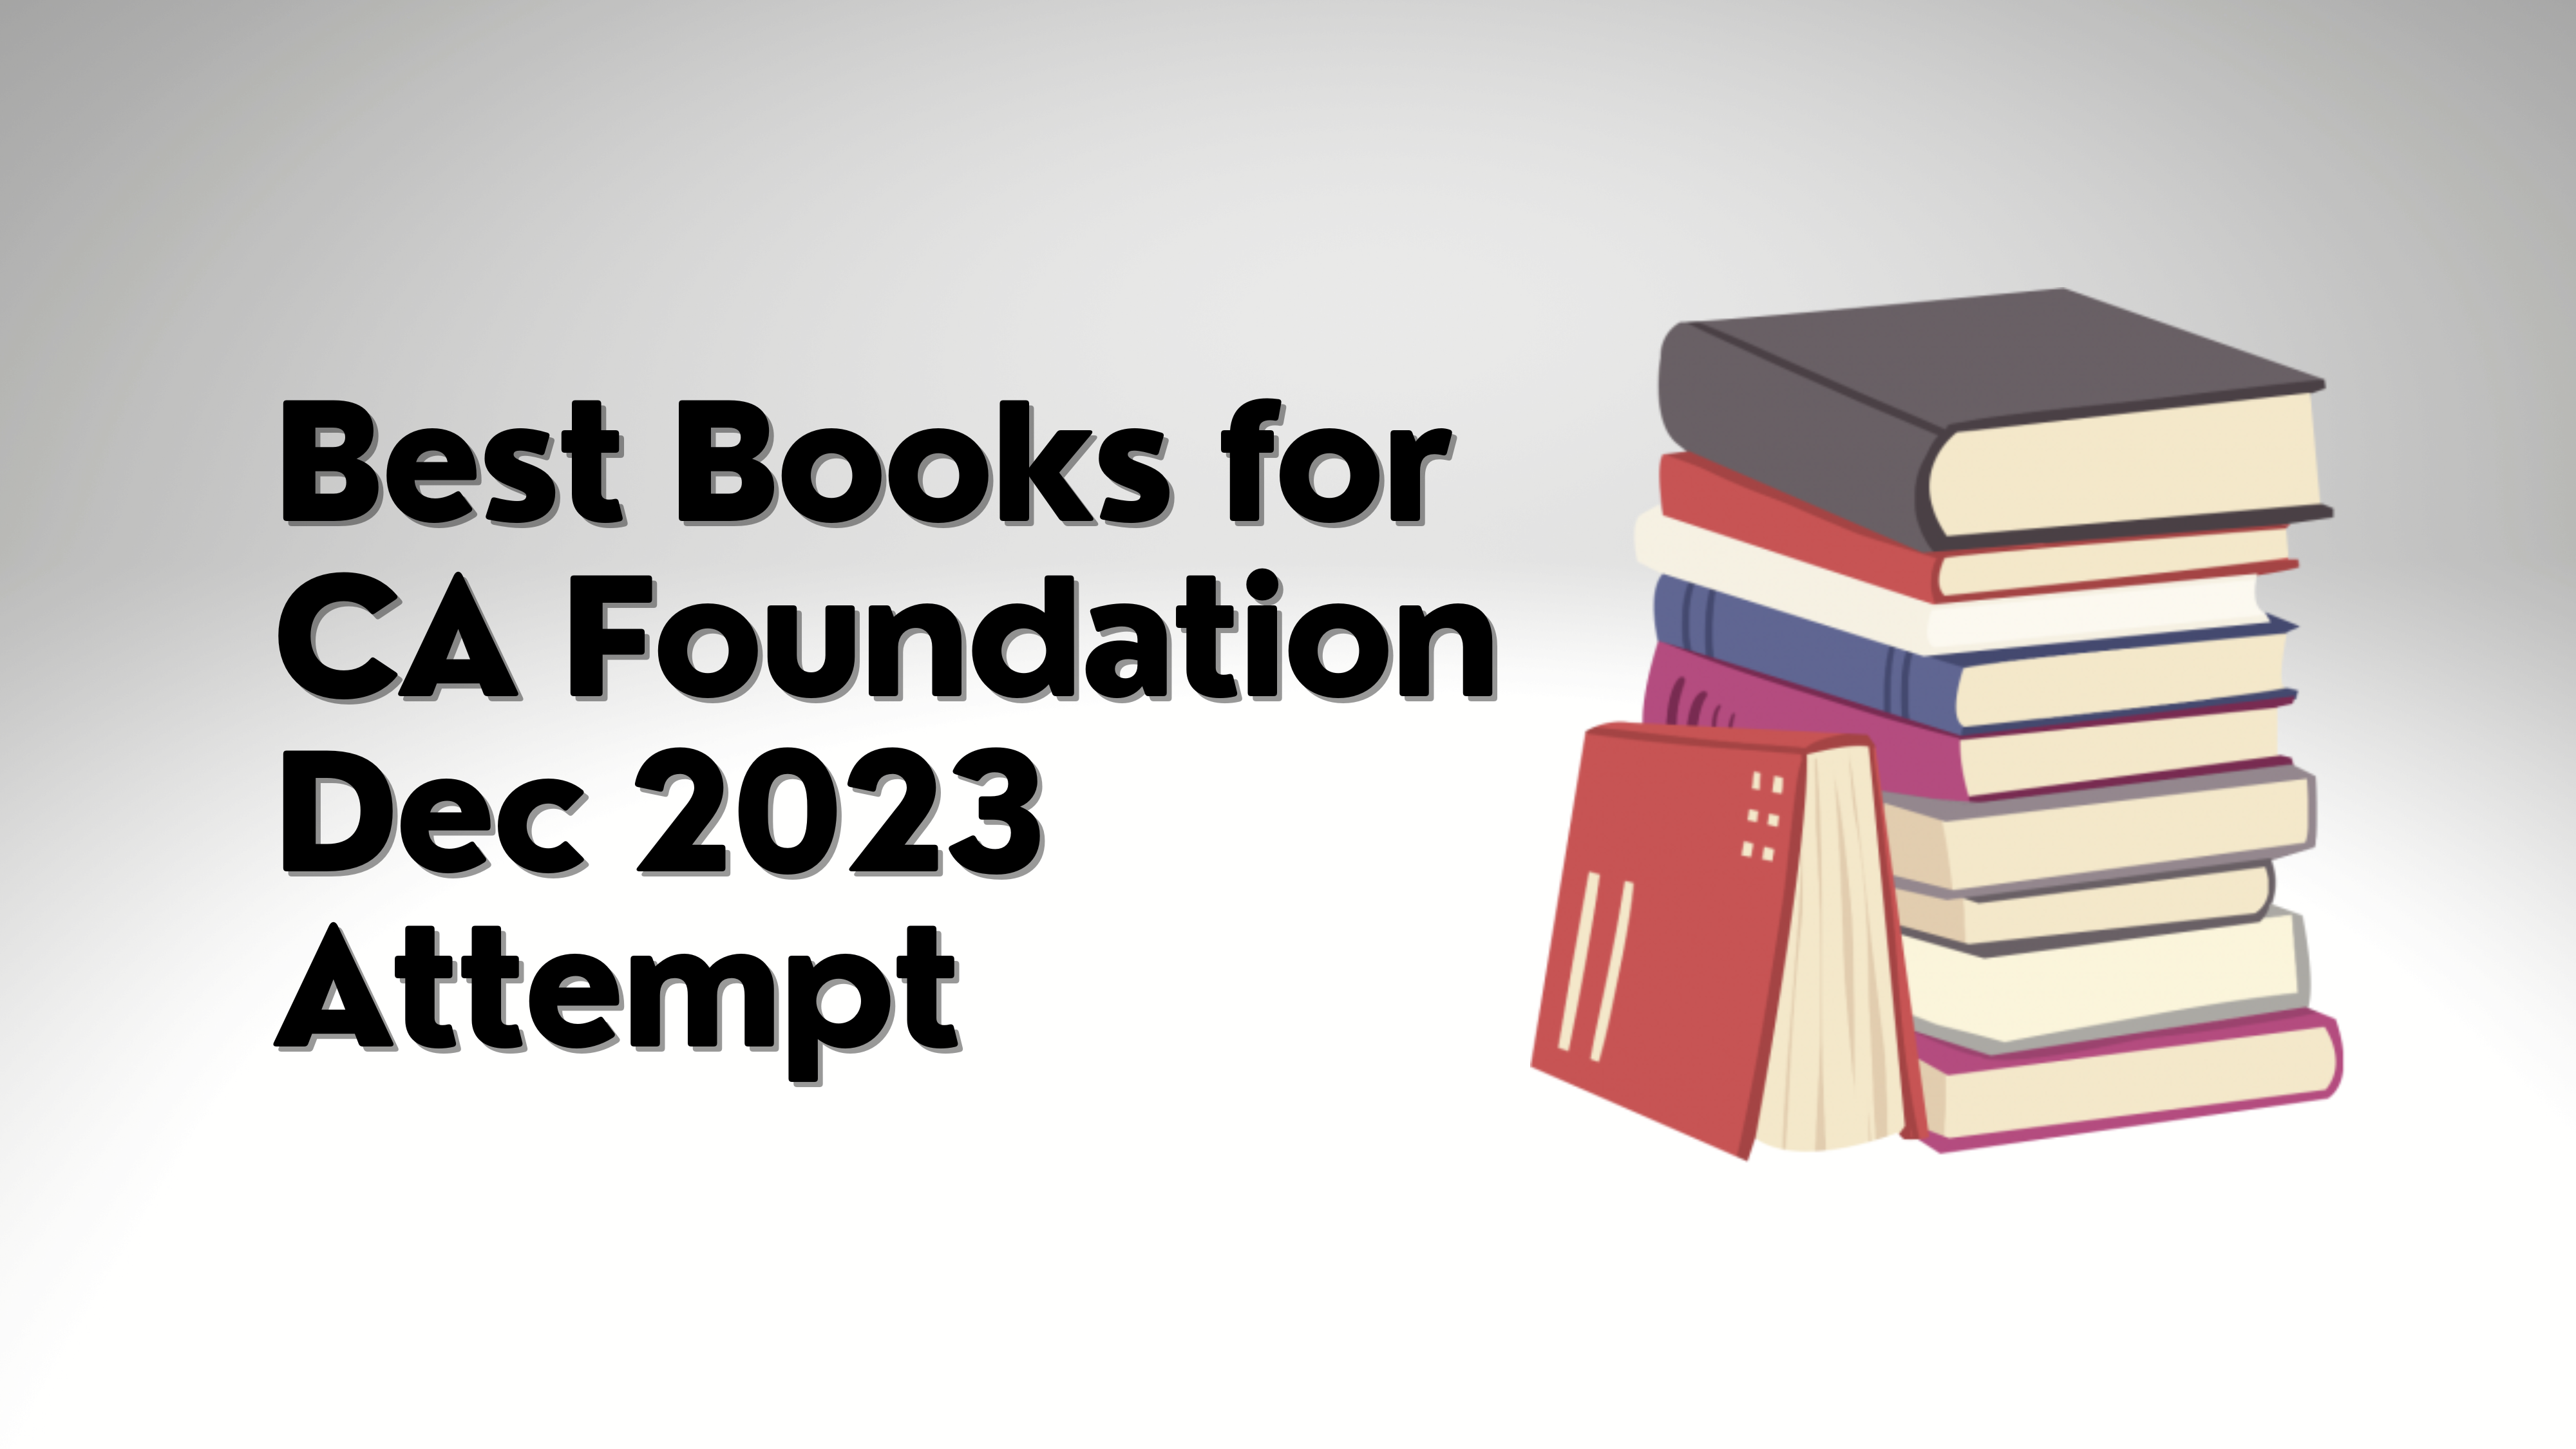 Best Books for CA Foundation Dec 2023 Attempt